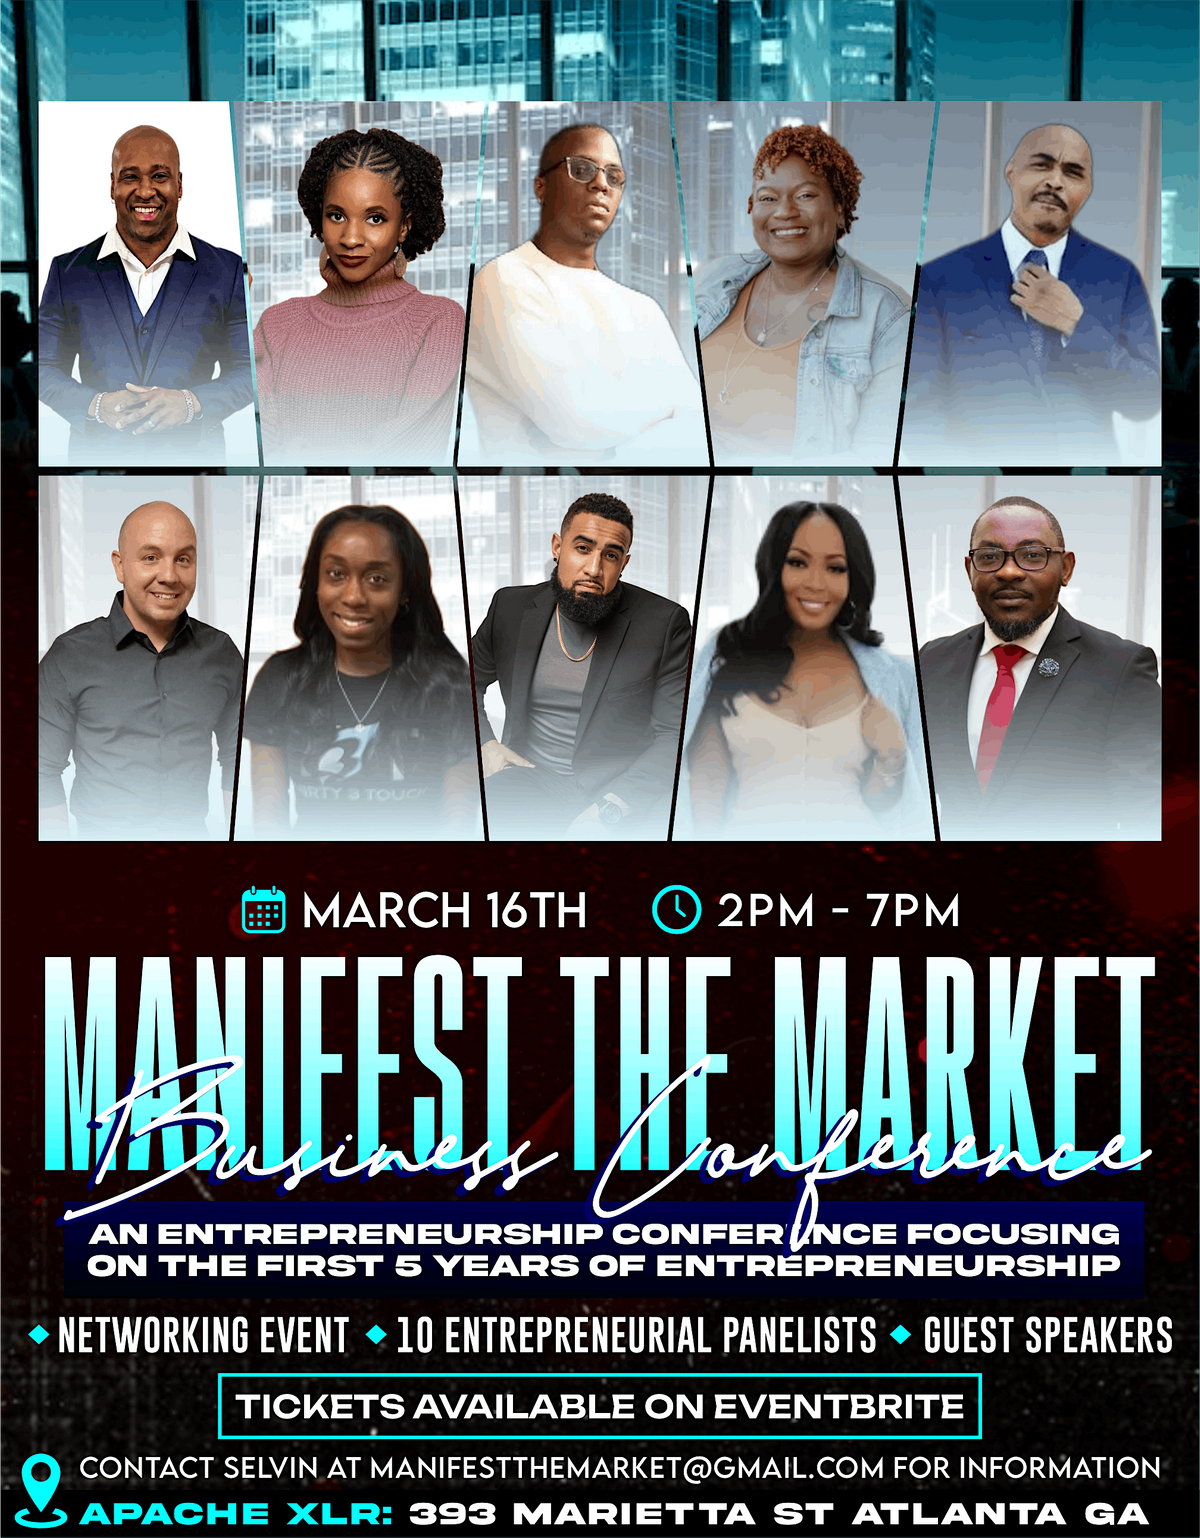 MANIFEST THE MARKET BUSINESS CONFERENCE